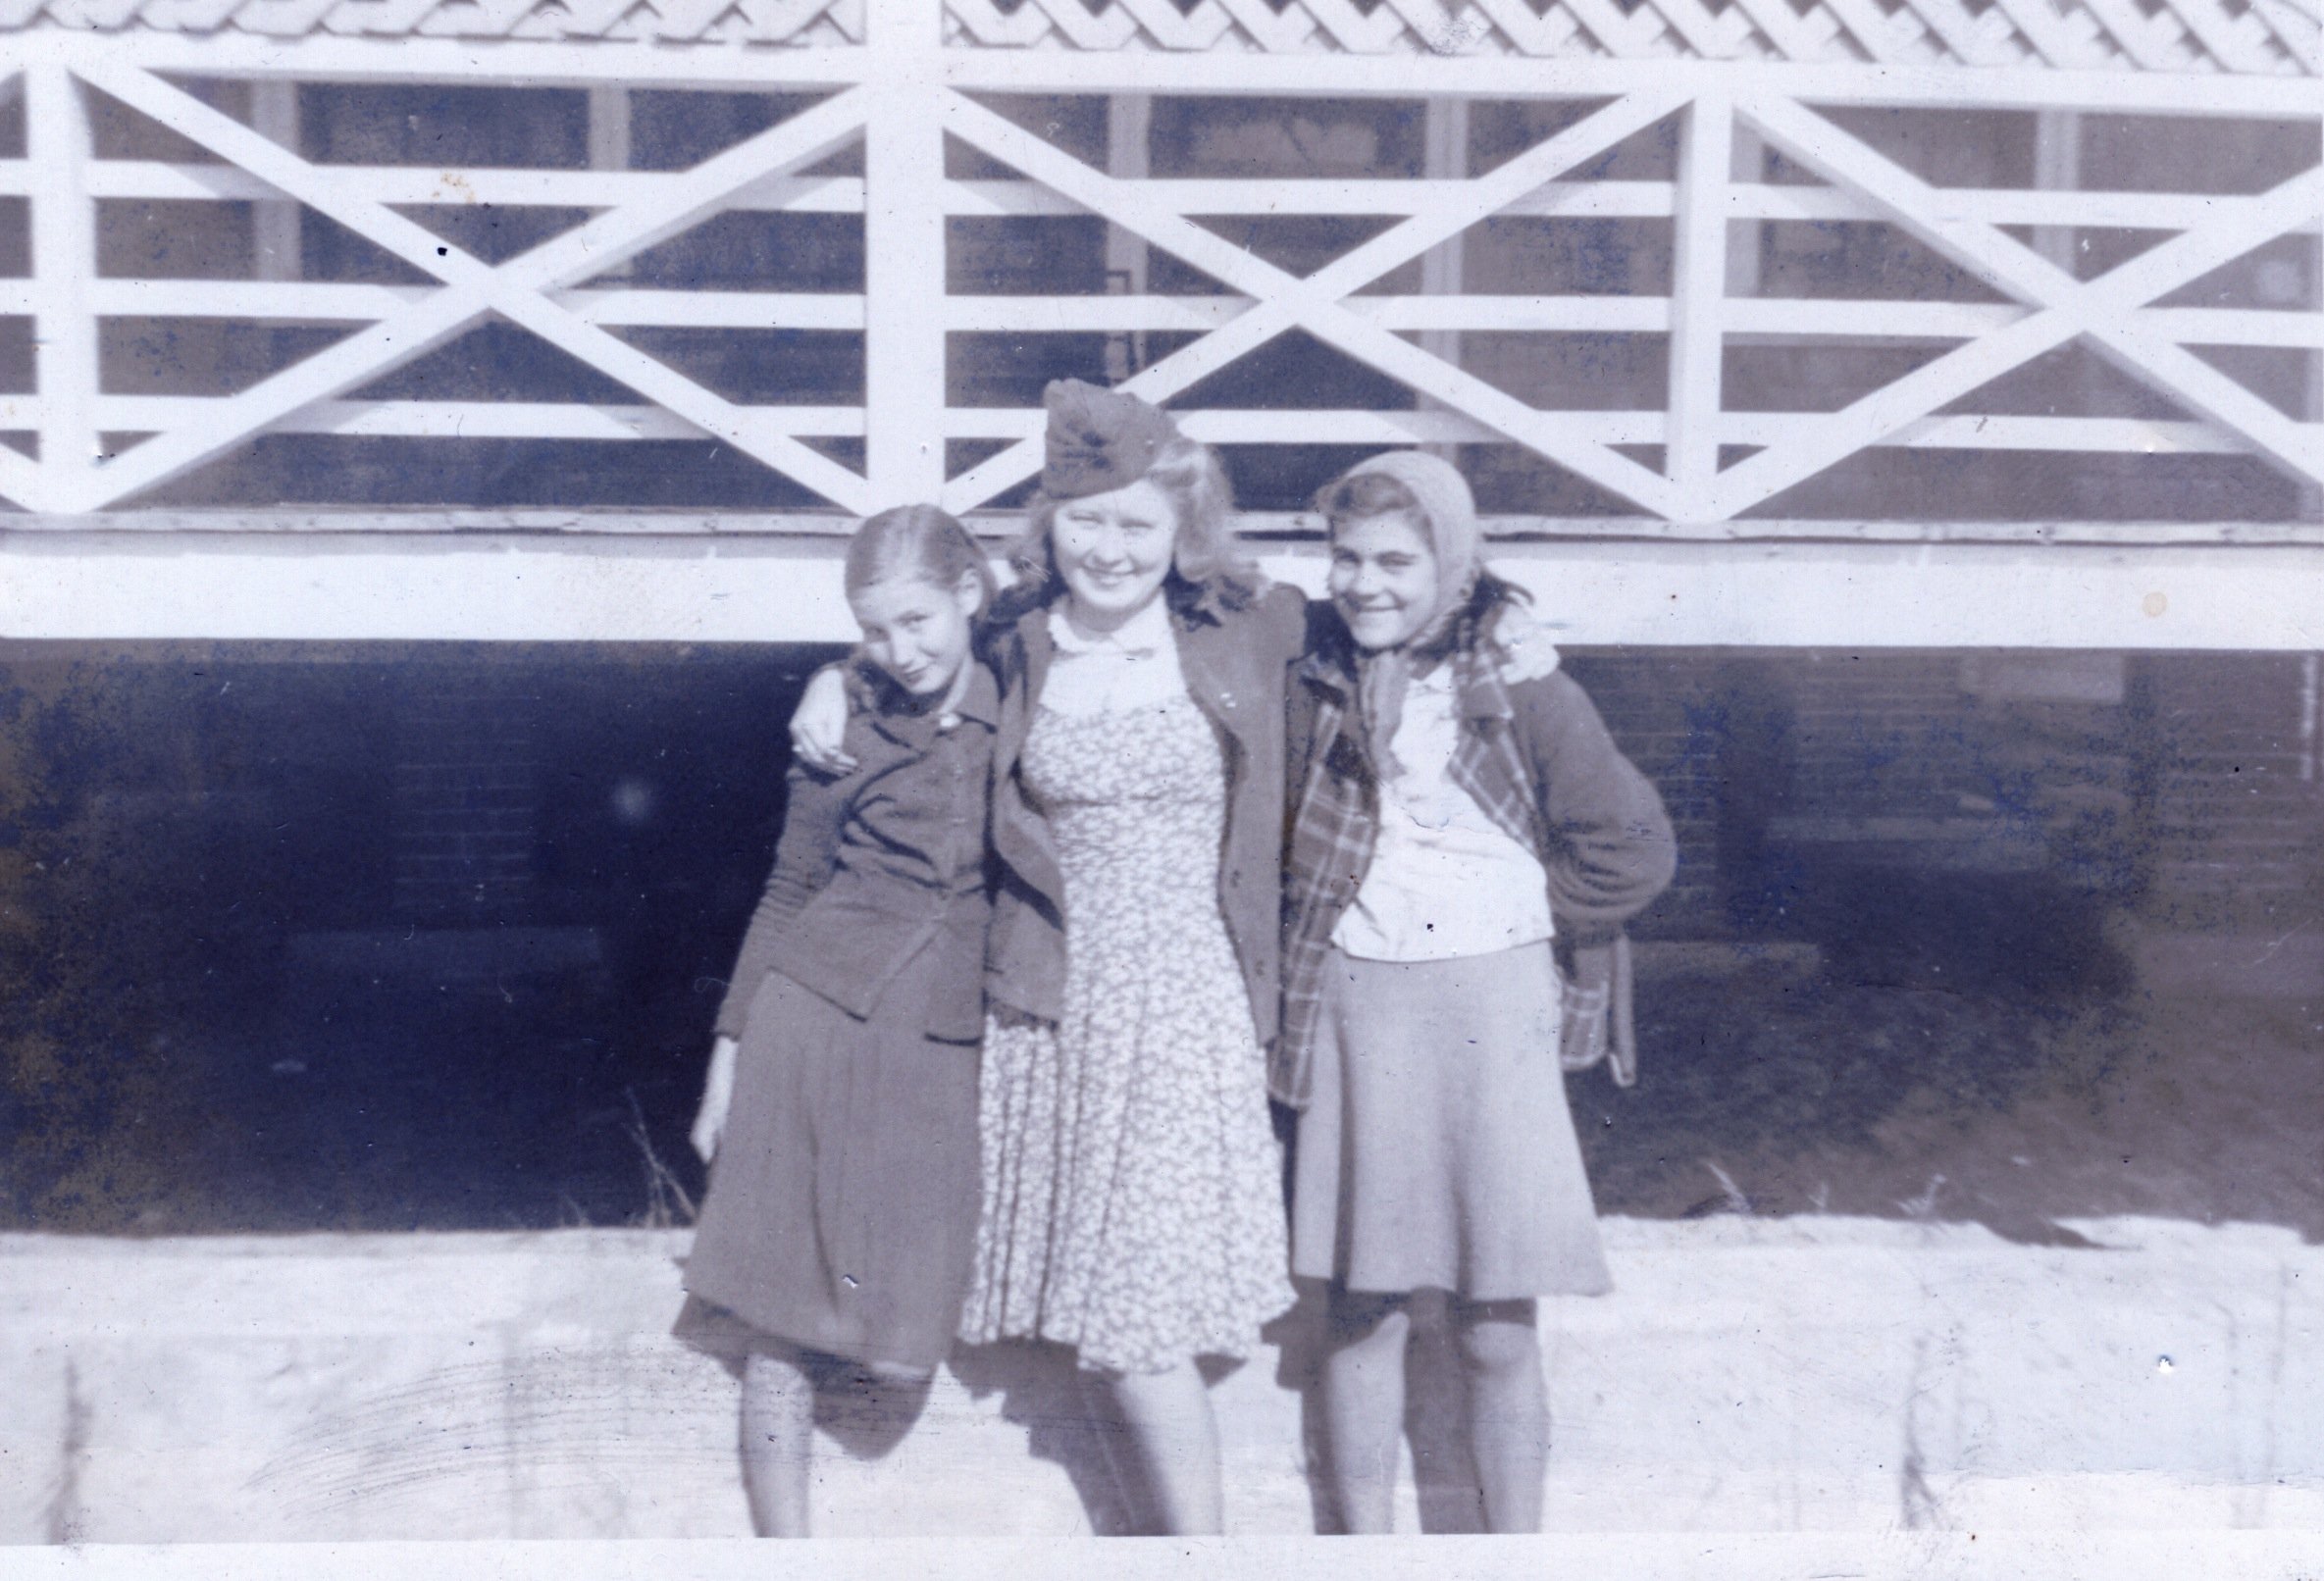 Marion Hunberry and friends maybe in front of 1301.5 Shackleford Street ca 1942